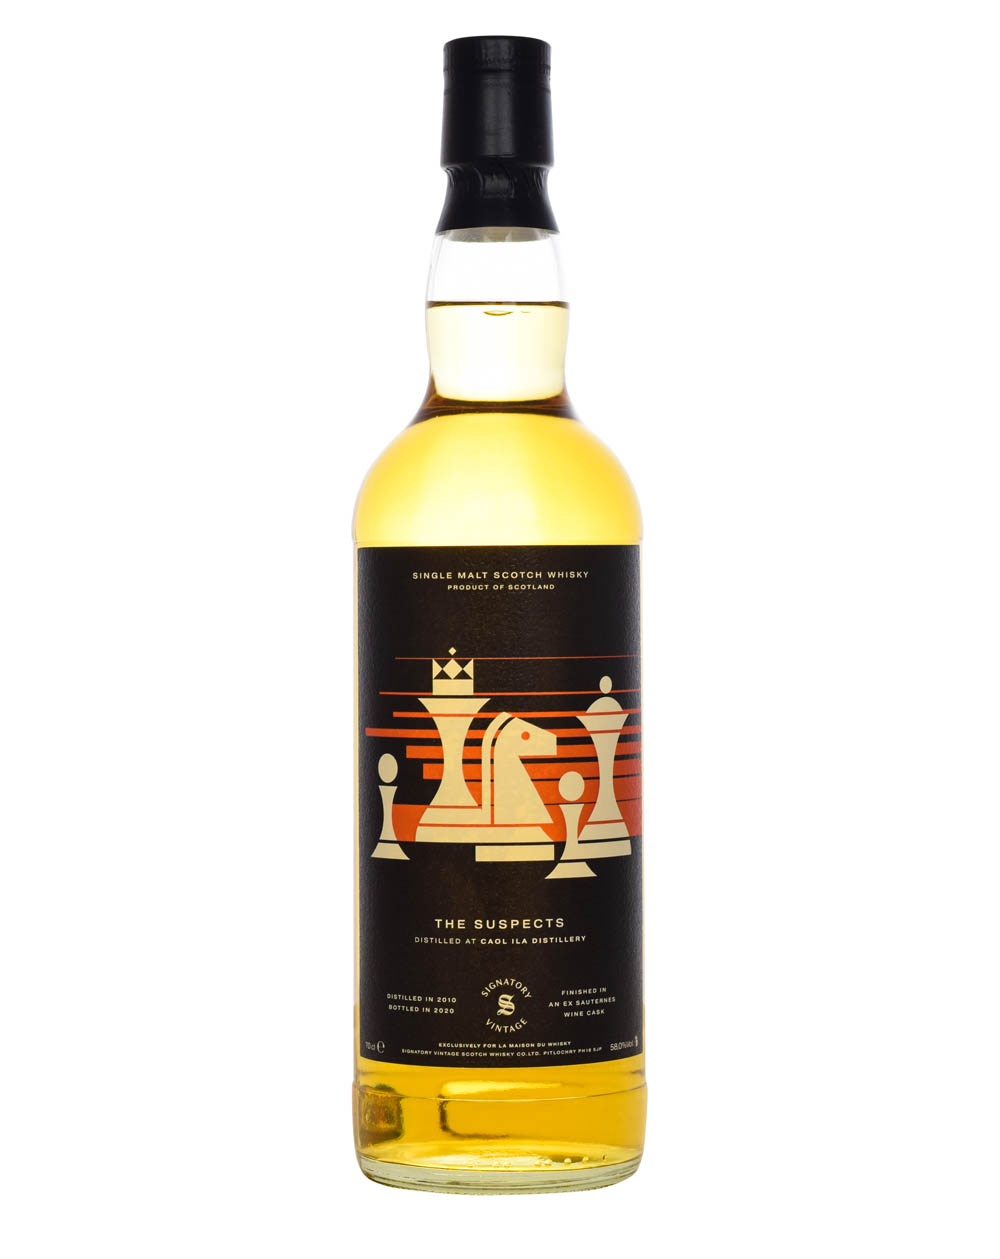 Caol Ila 10 Years Old 2010 The Suspects Signatory Vintage Musthave Malts MHM